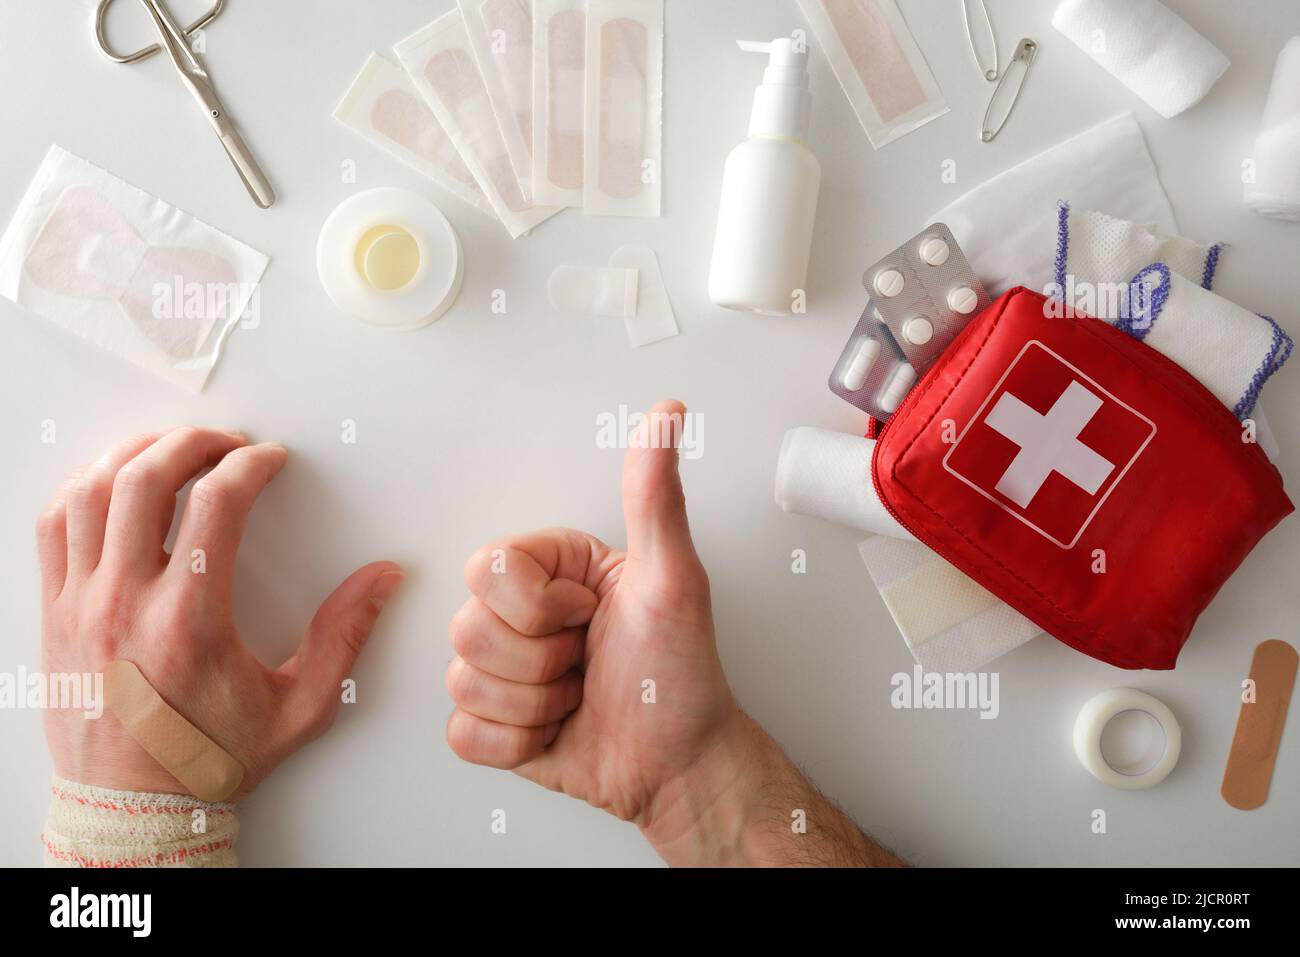 Heal successfully with portable first aid equipment on the table and hand with ok gesture and bandaged hand. Horizontal composition. Top view. Stock Photo